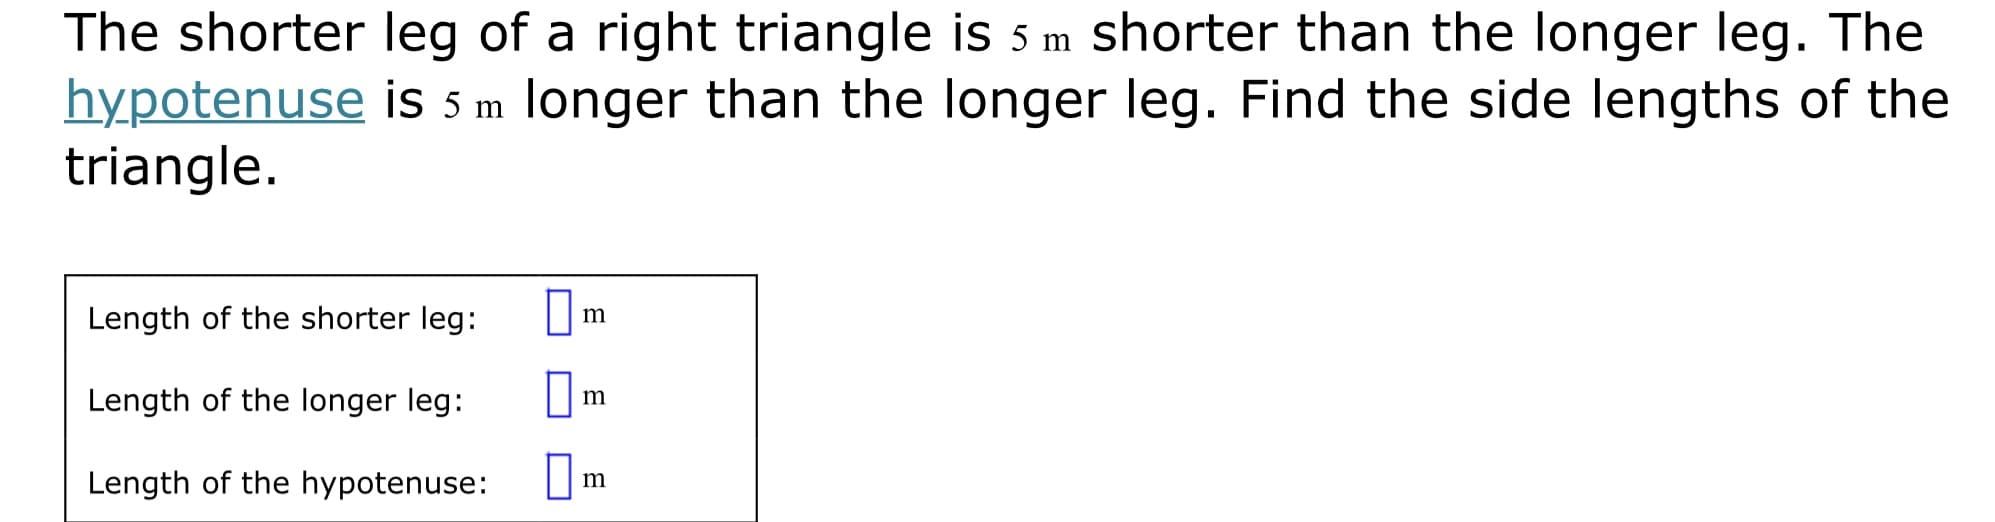 The shorter leg of a right triangle is 5 m shorter than the longer leg. The
hypotenuse is 5 m longer than the longer leg. Find the side lengths of the
triangle.
Length of the shorter leg:
m
Length of the longer leg:
m
Length of the hypotenuse:
m
